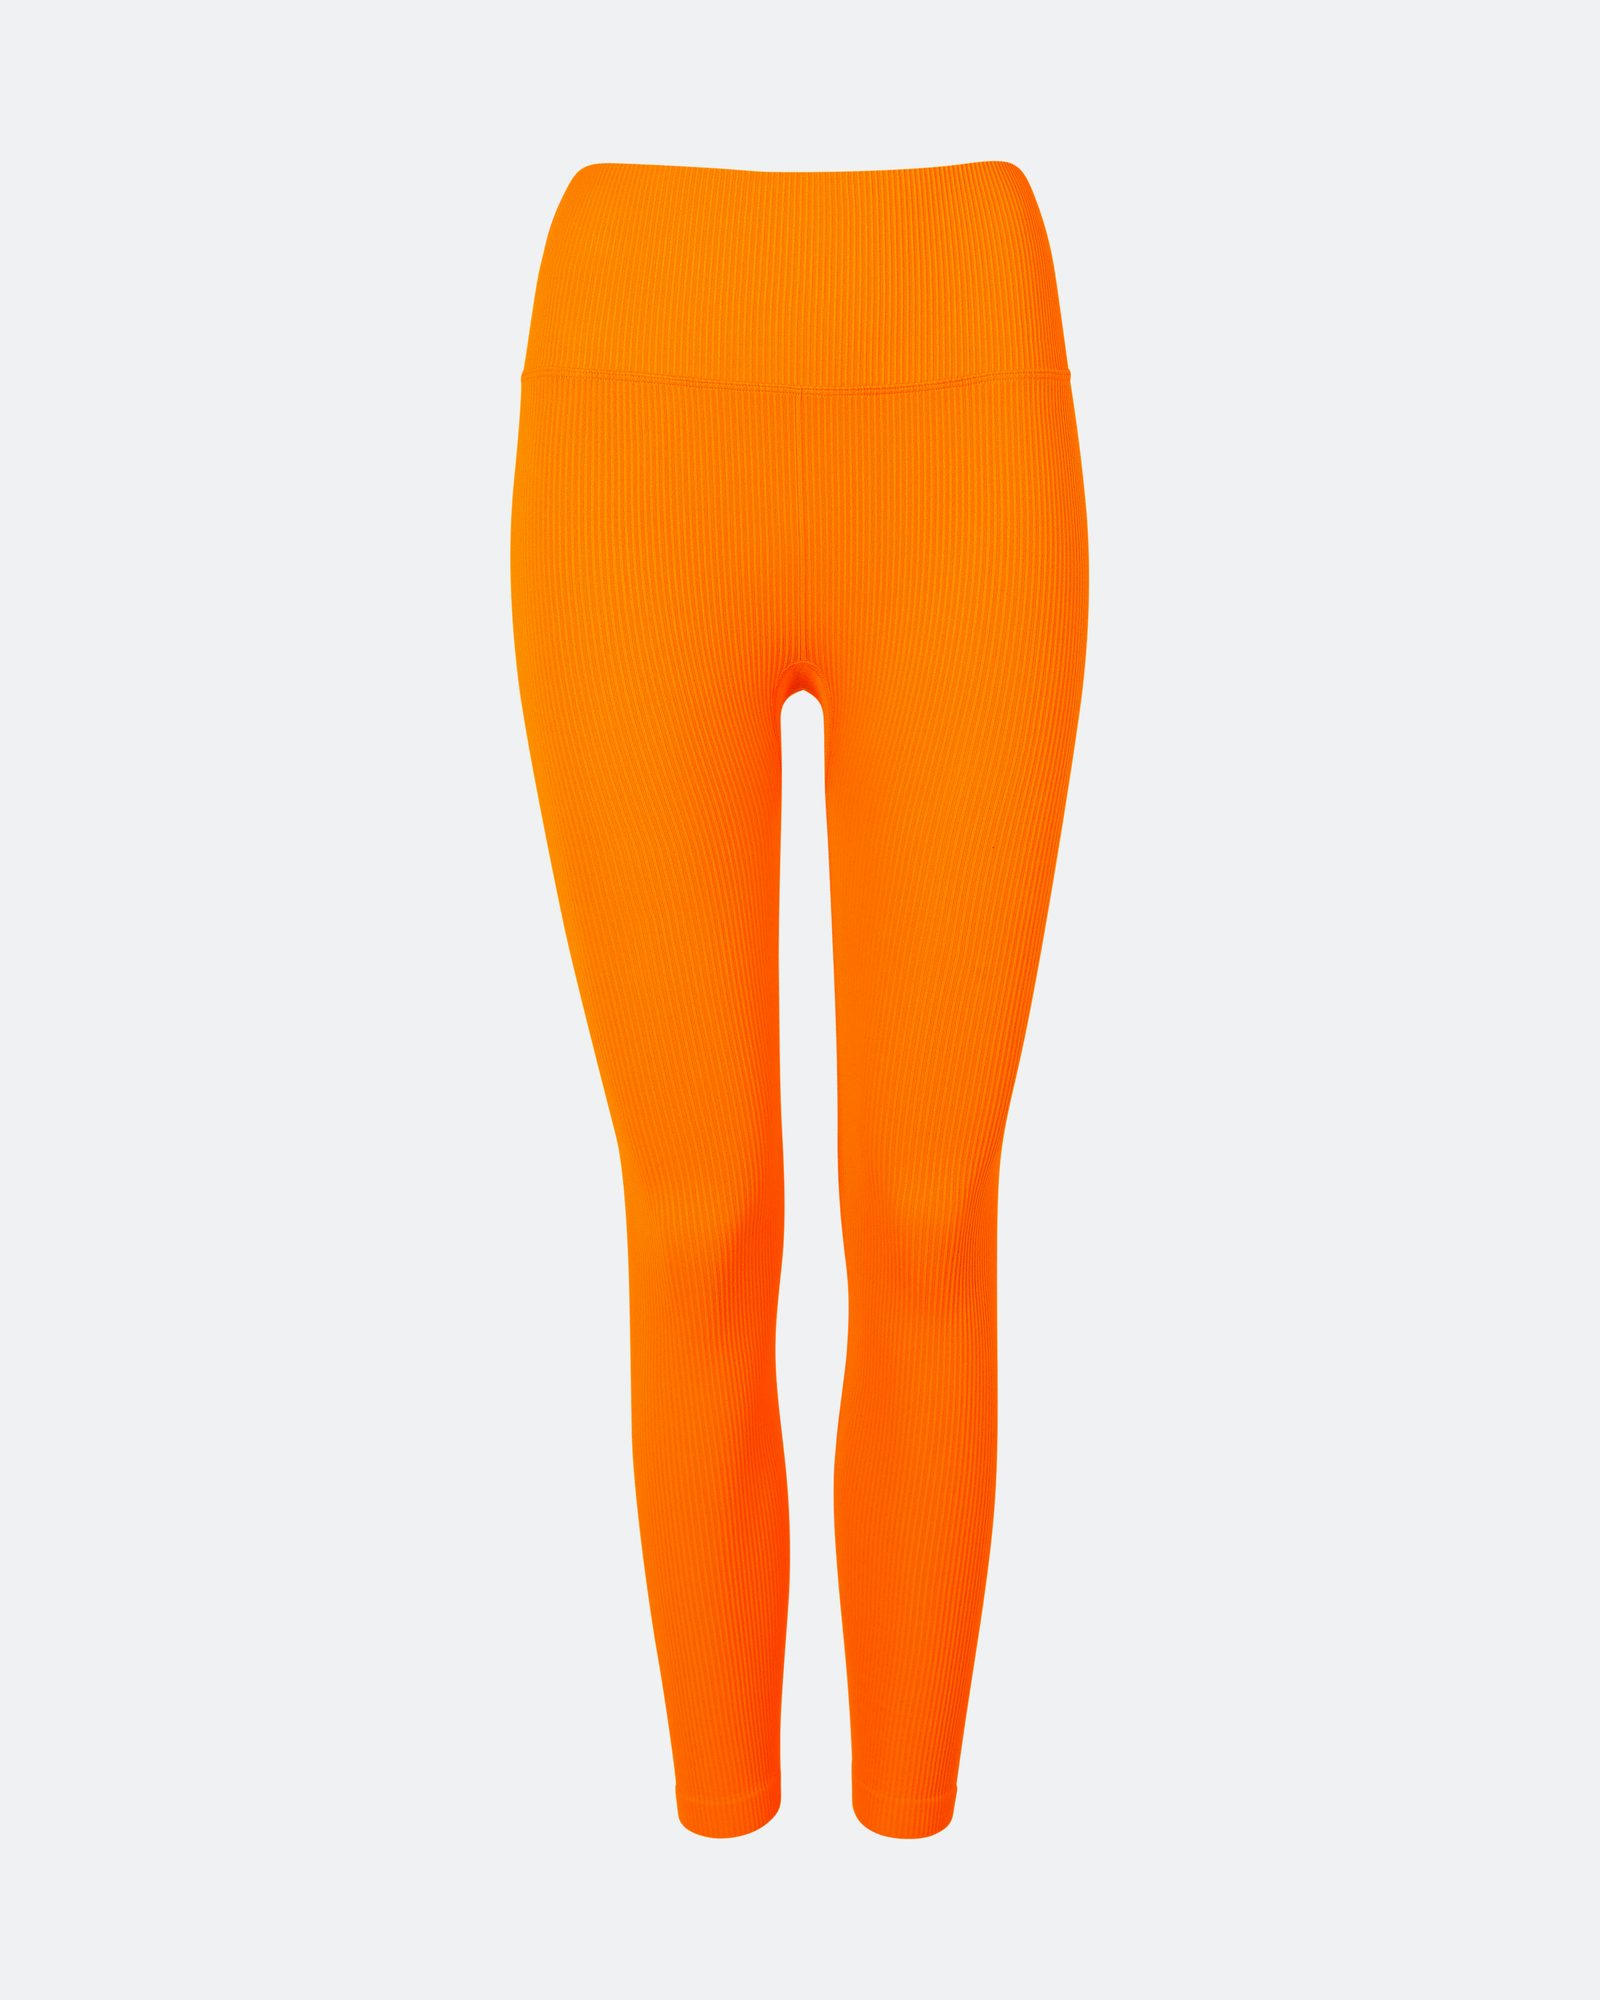 Zyia Tangerine Block Light N Tight Leggings Orange Size 4 - $19 (75% Off  Retail) New With Tags - From Kristen